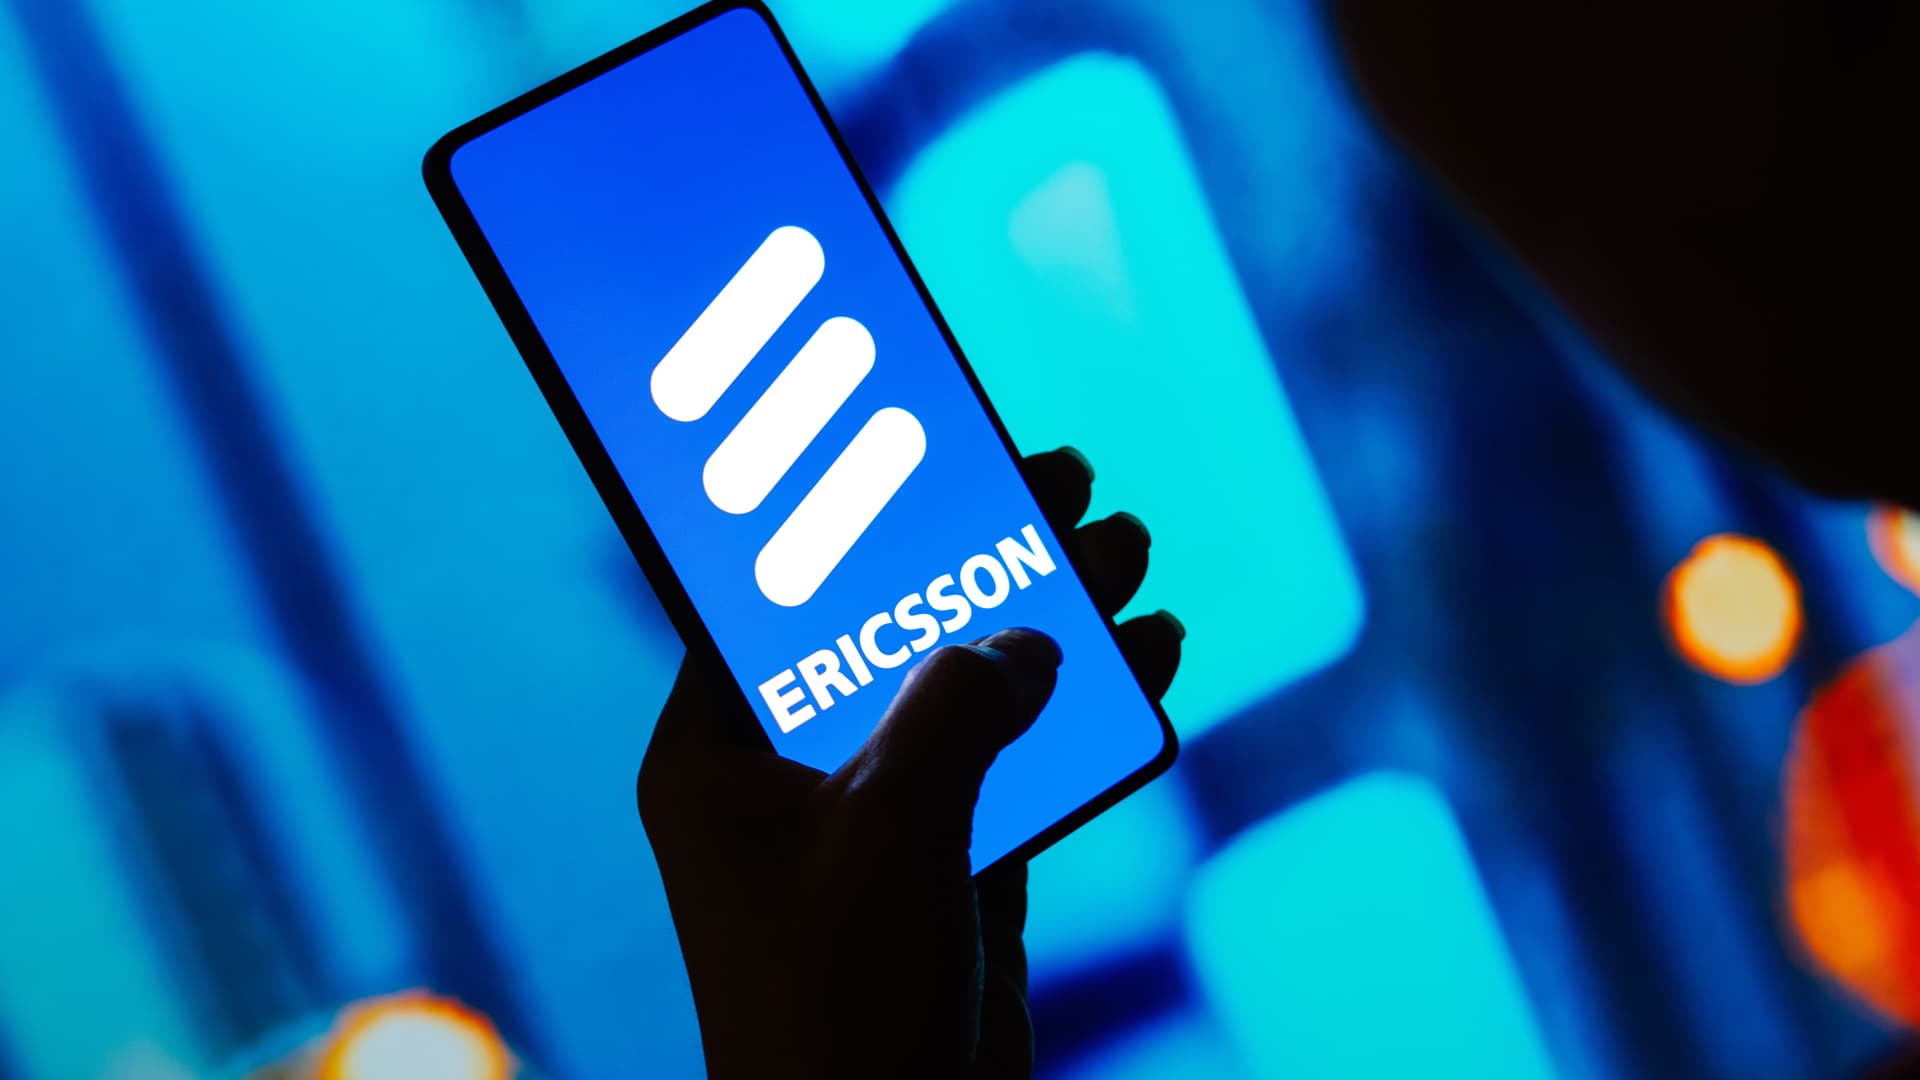 Ericsson’s Q1 revenue grows unexpectedly, eyes stabilisation of product sales in H2